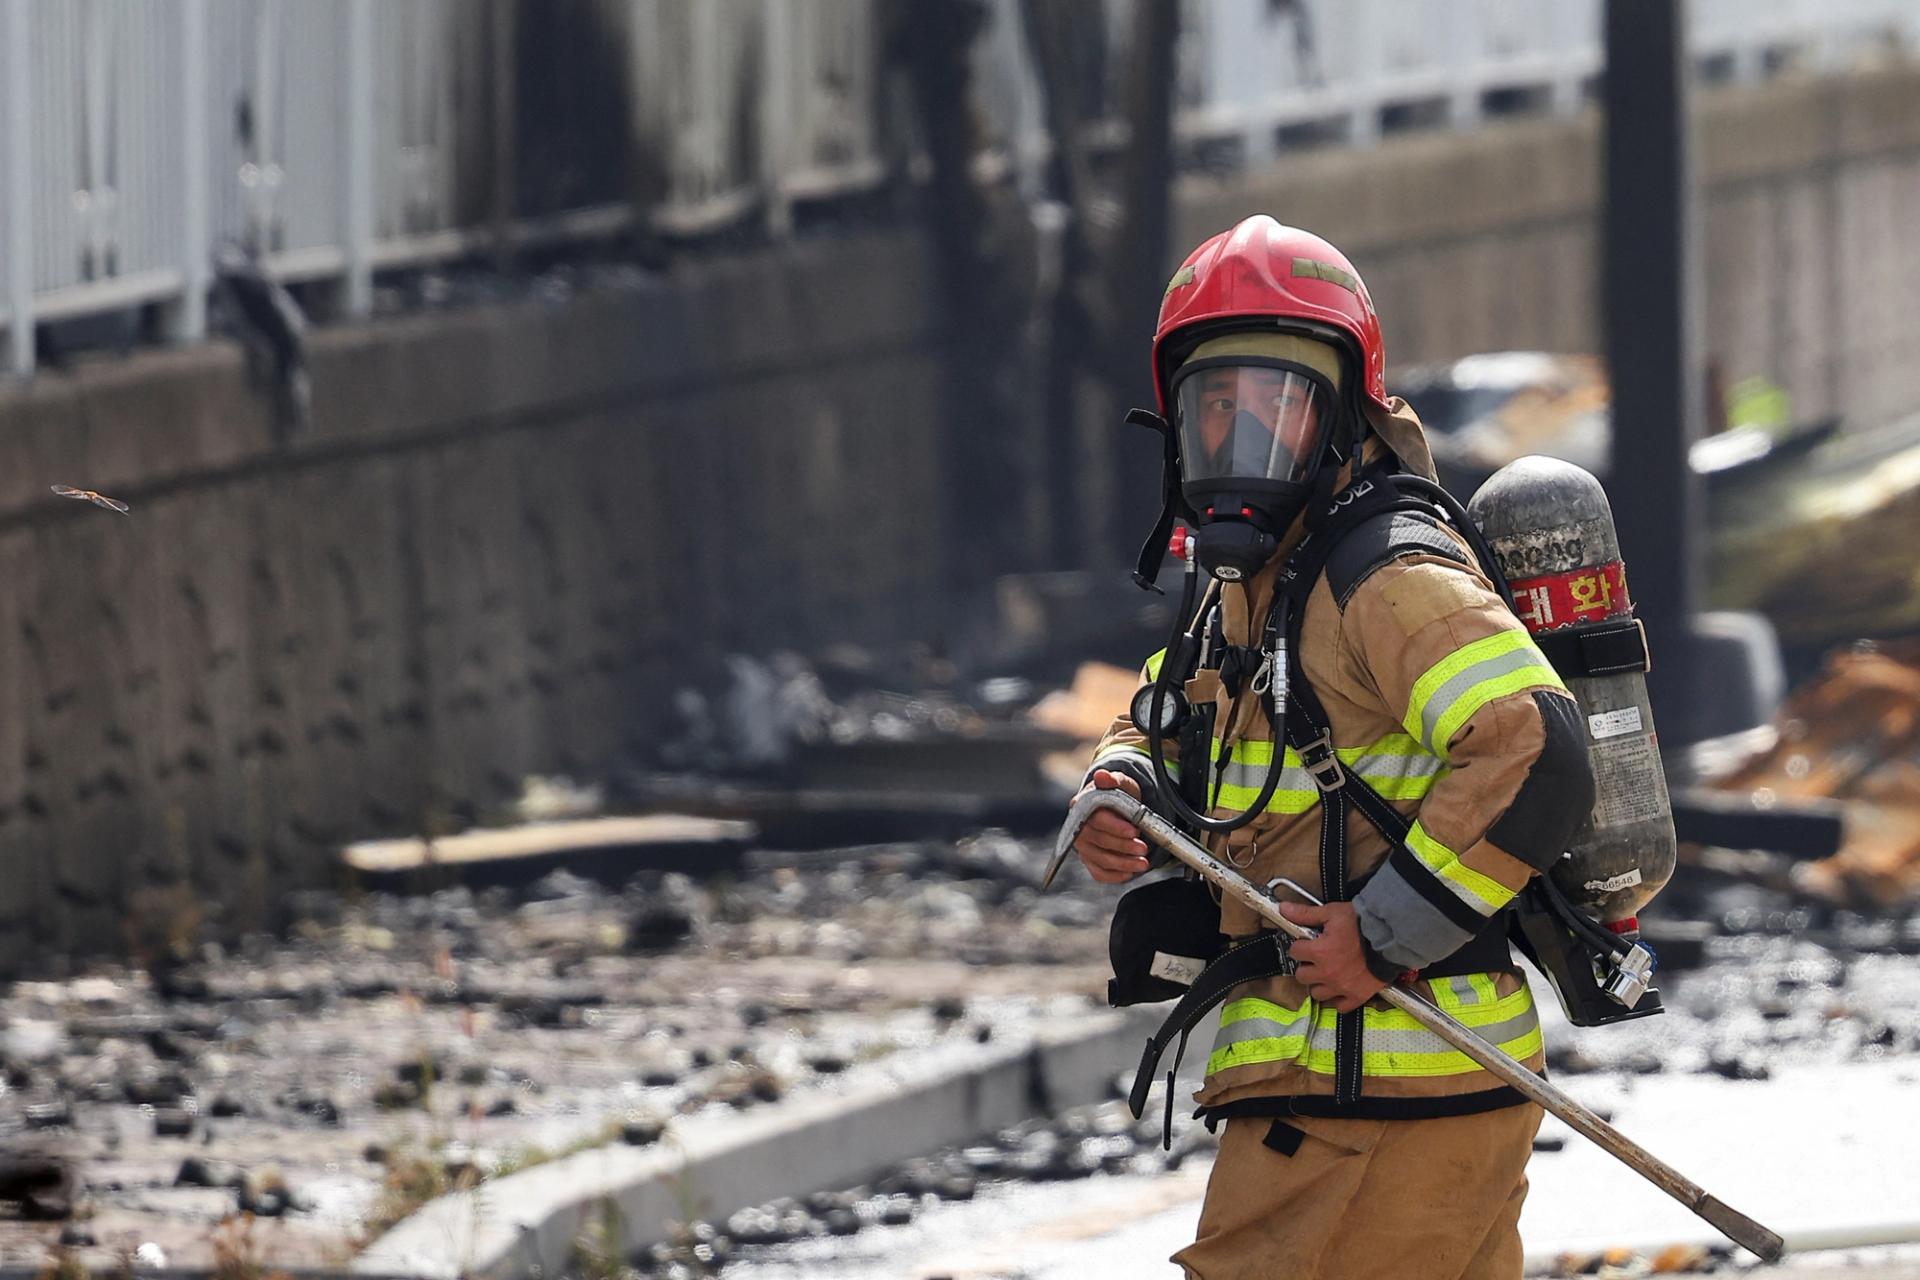 A firefighter on the site of the fire in Hwaseong, South Korea.